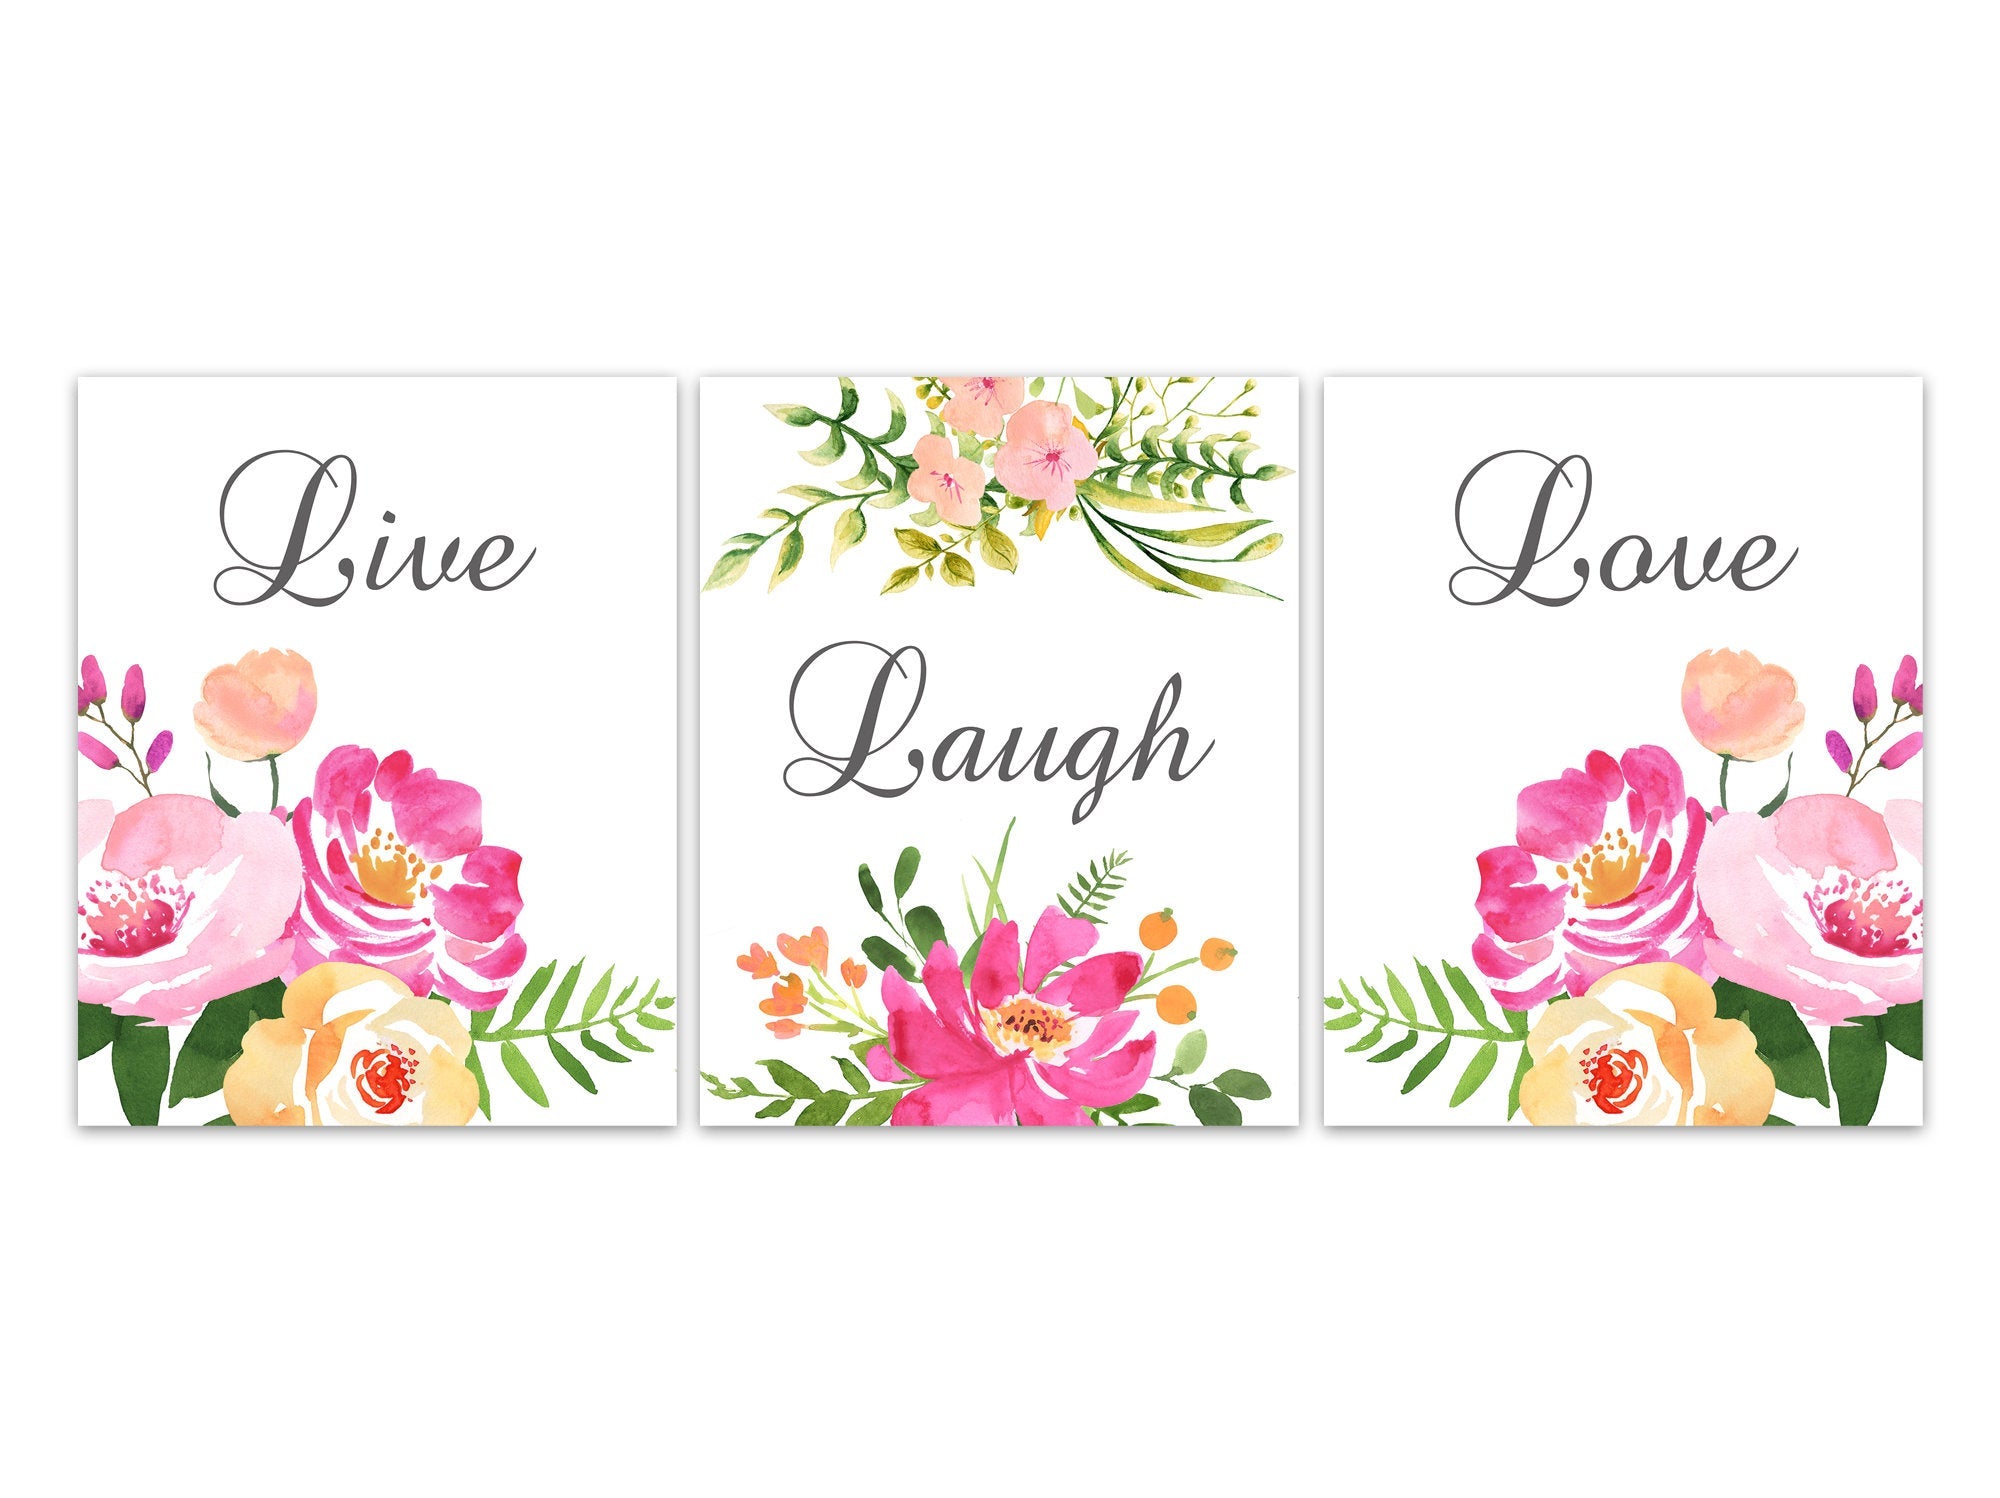 Live Laugh Love Home Decor Wall Art Prints or Canvas, Pink Floral Bedroom Wall Decor, Watercolor Floral Artwork, Living Room Decor - HOME455